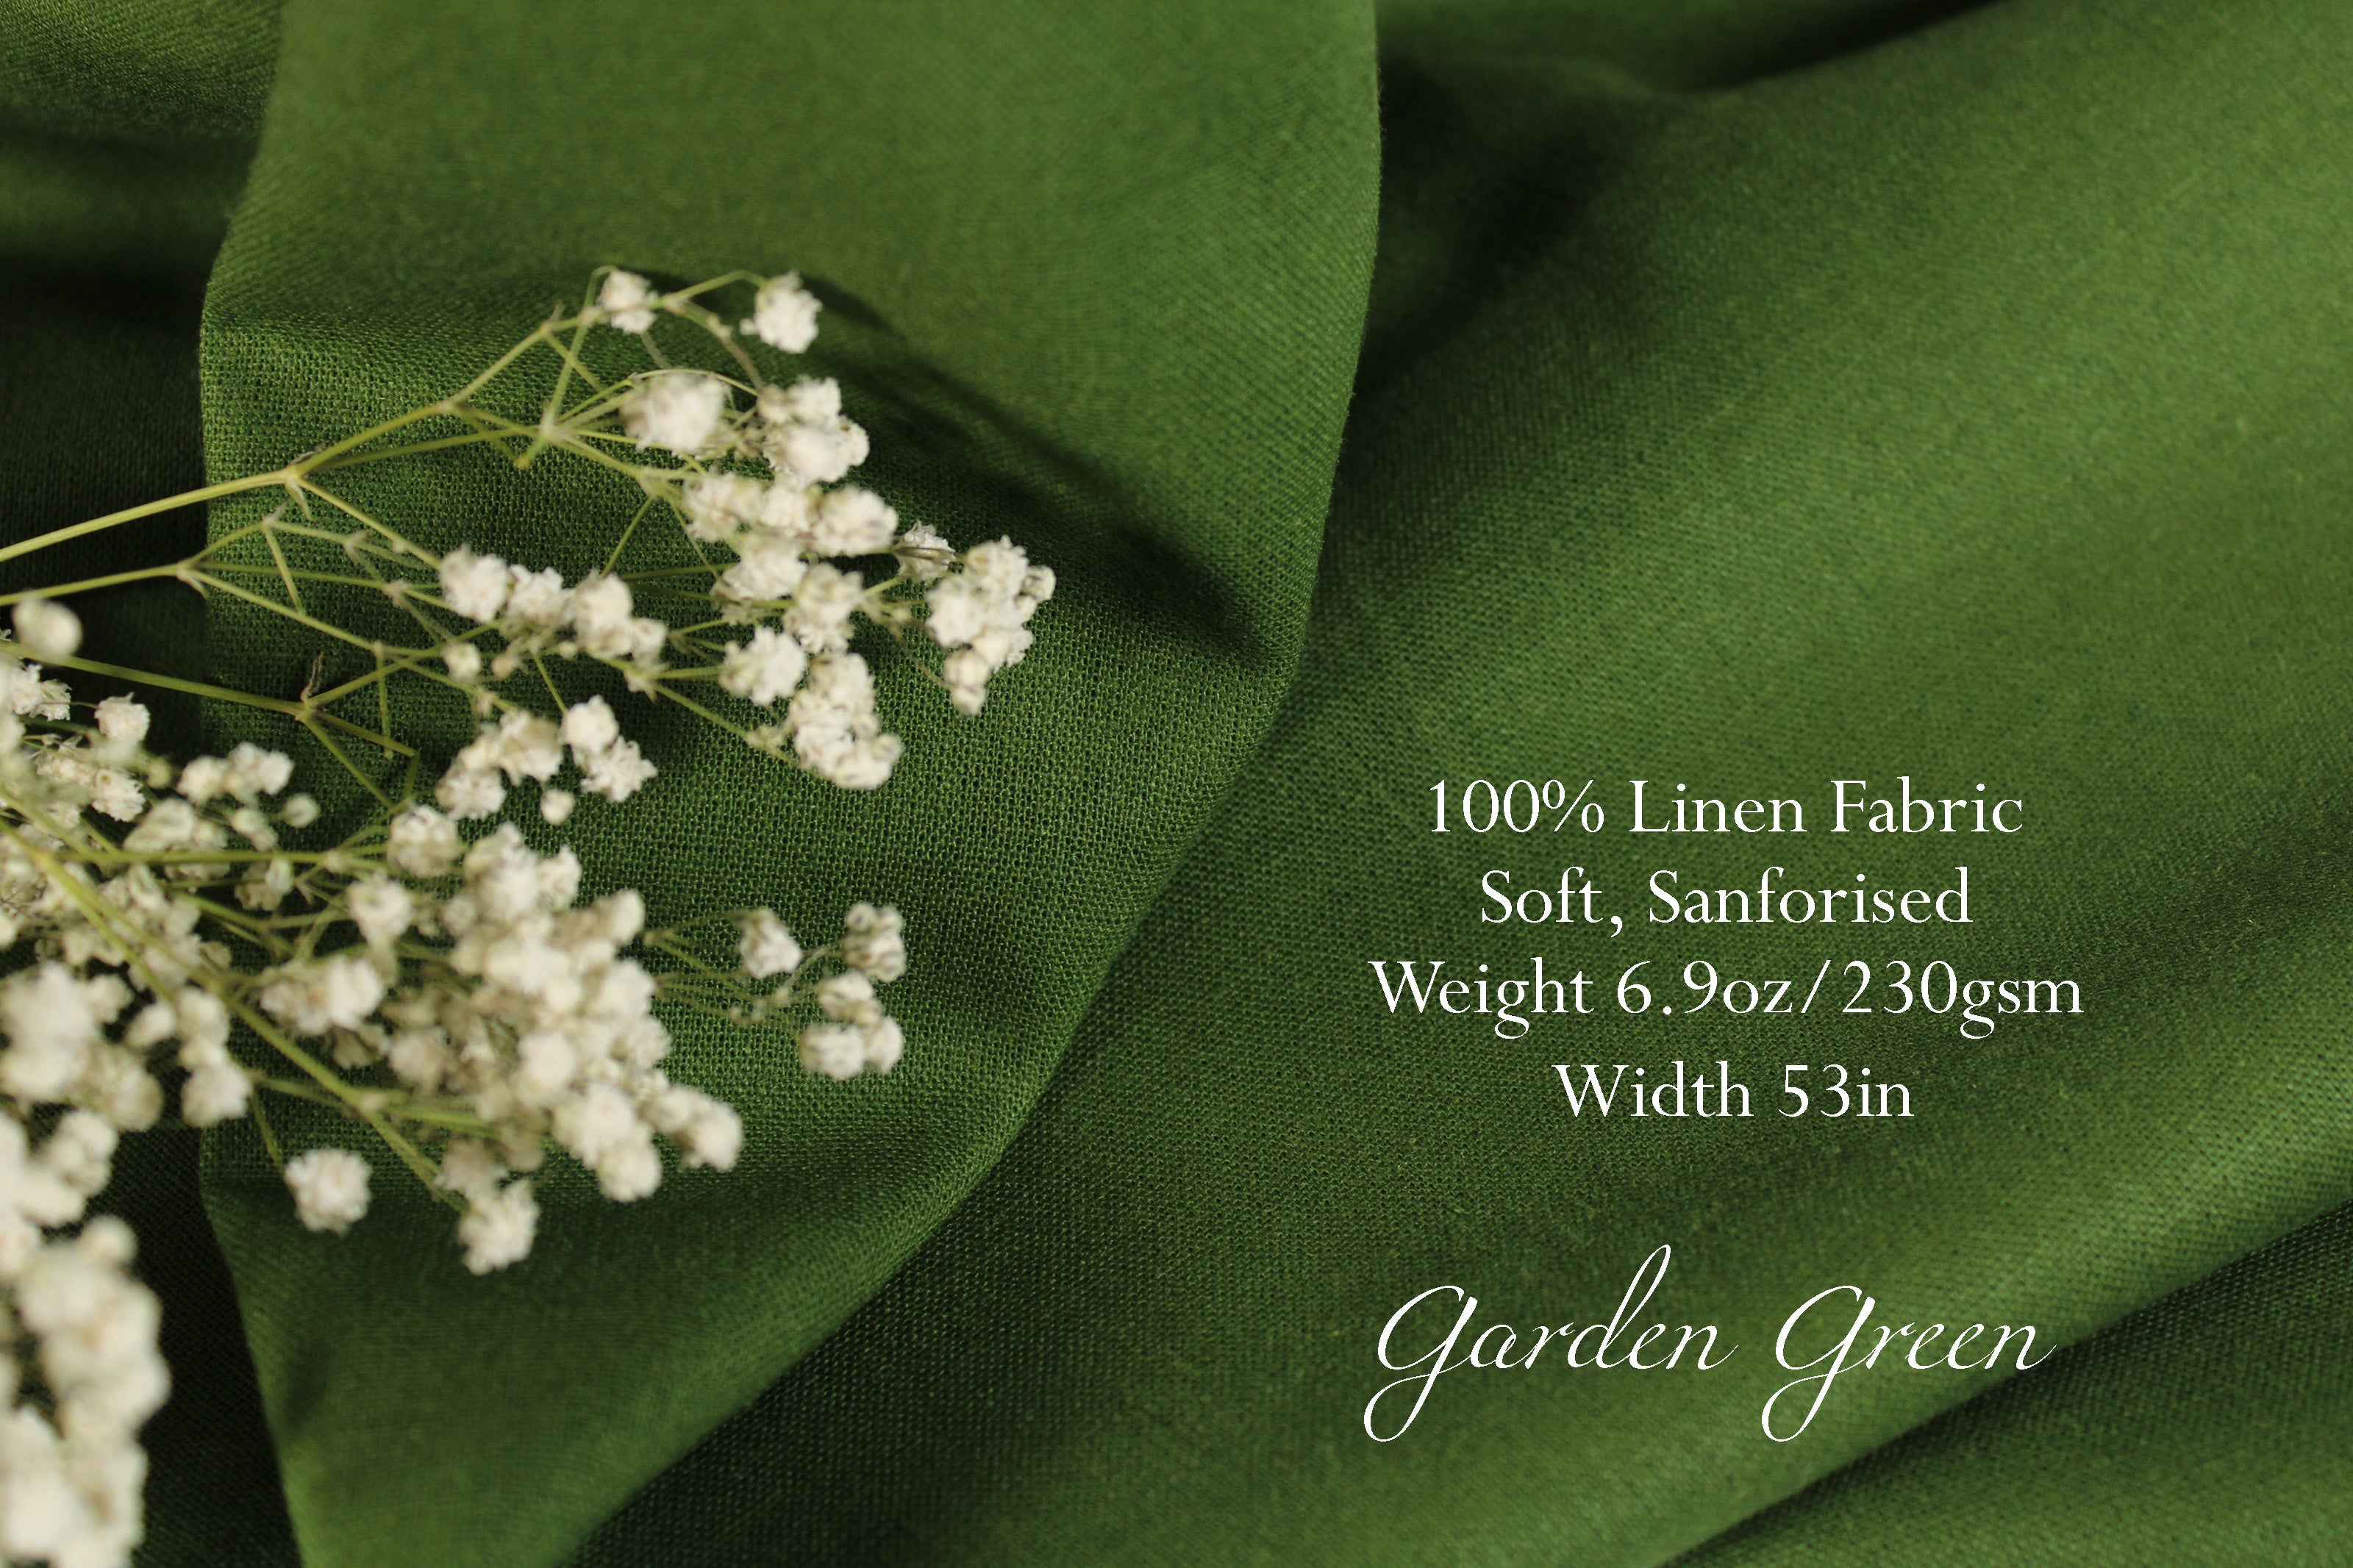 NEW LINEN FABRIC COLLECTION!!! / 100% Linen Fabric by the Yard / Linen Fabric / Buy Linen Online